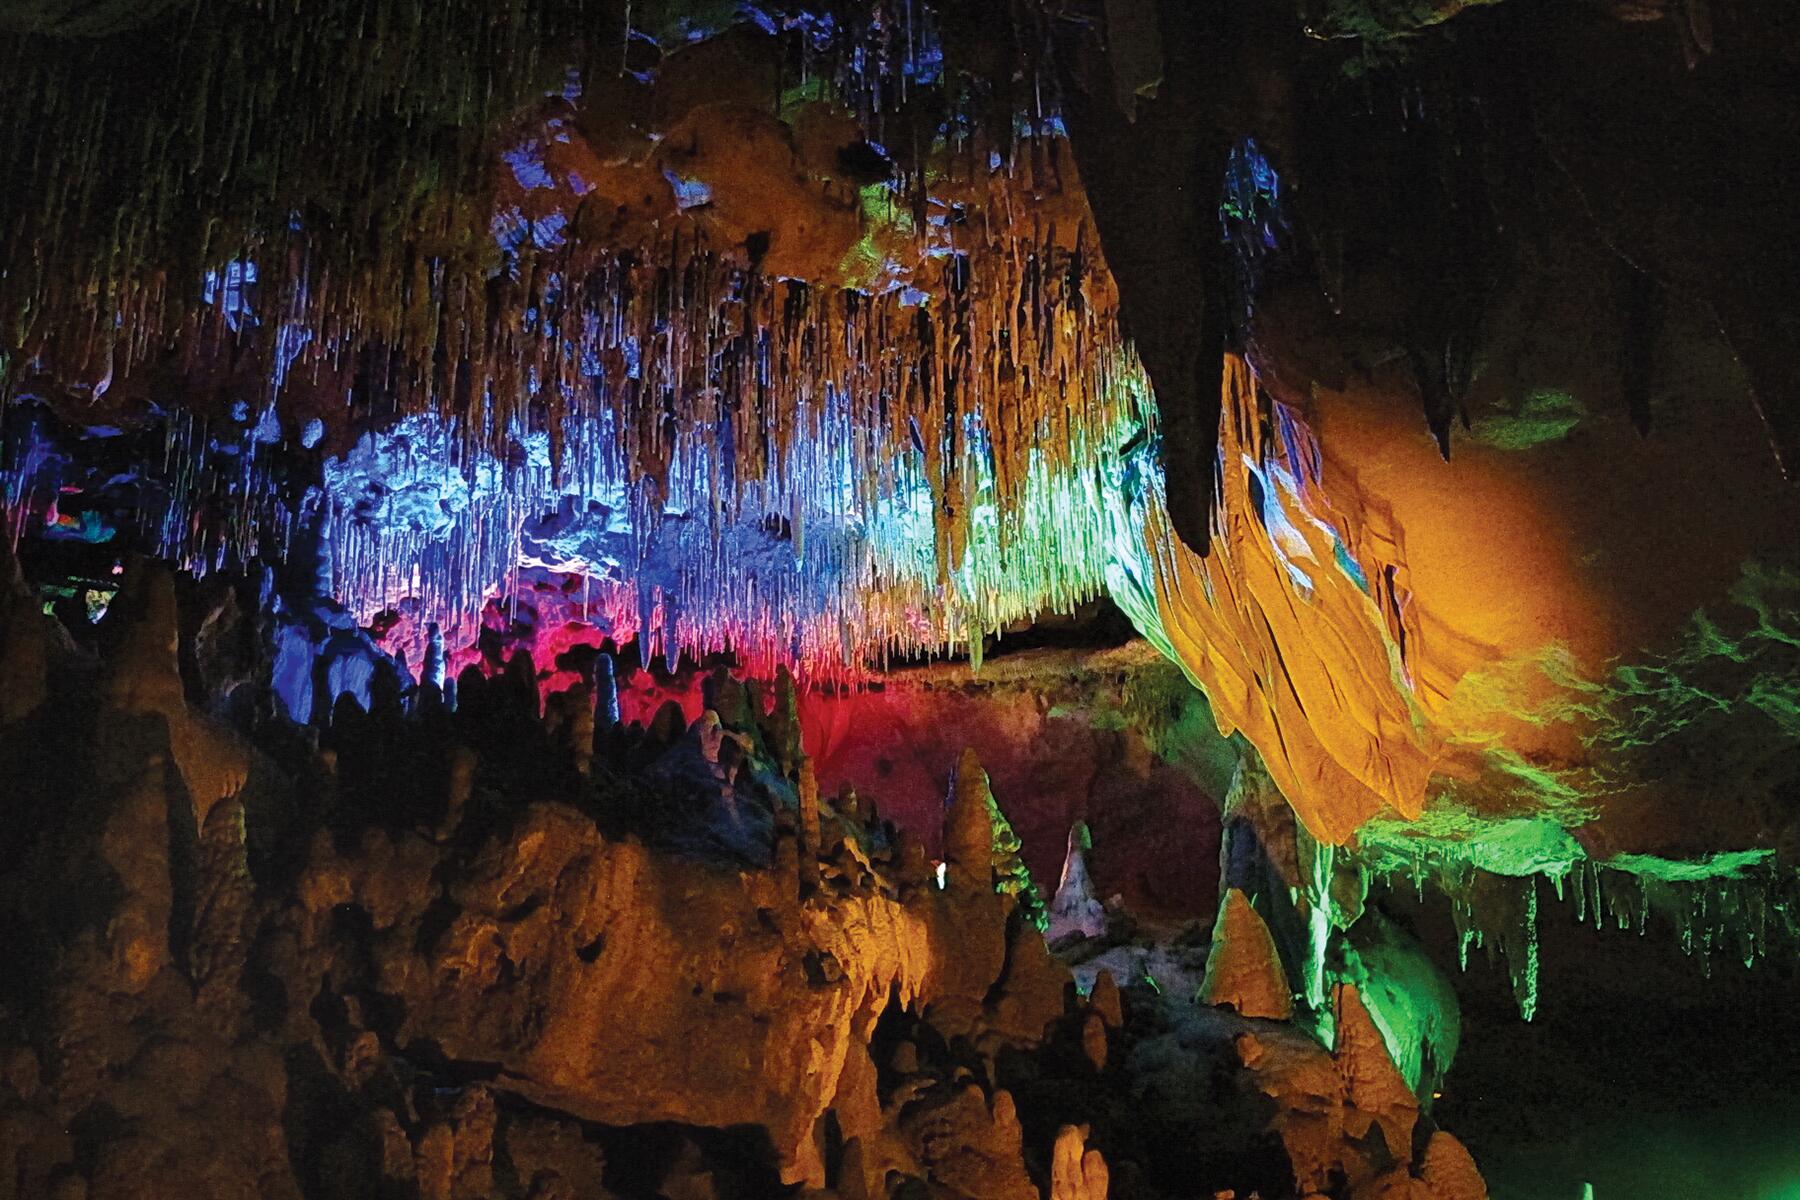 14 Underground Destinations to Visit Across the United States